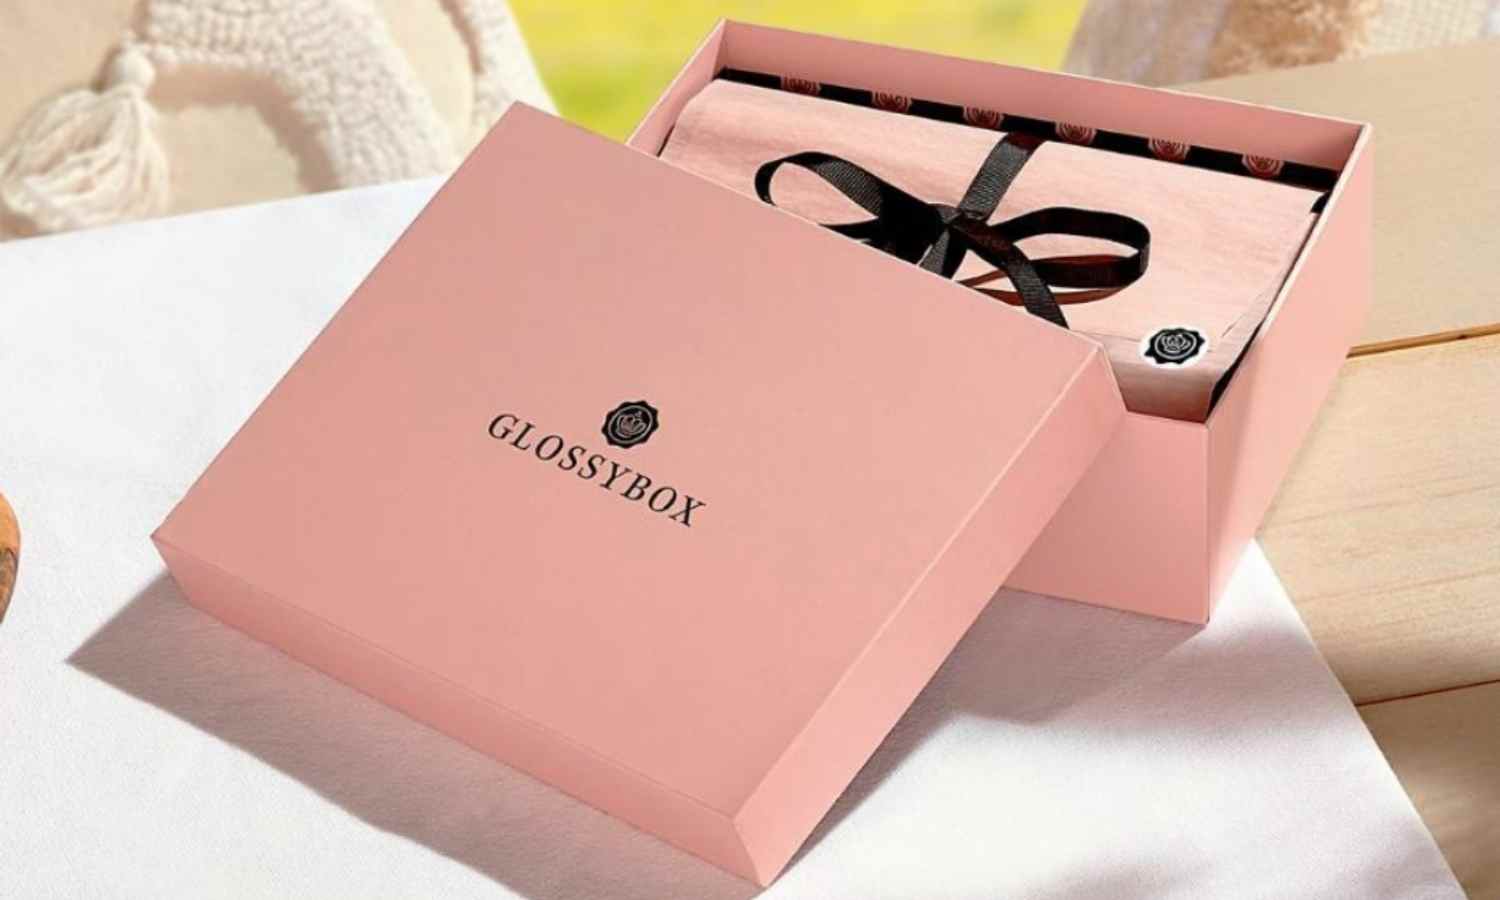 Glossybox Review: Is This Subscription Worth It?